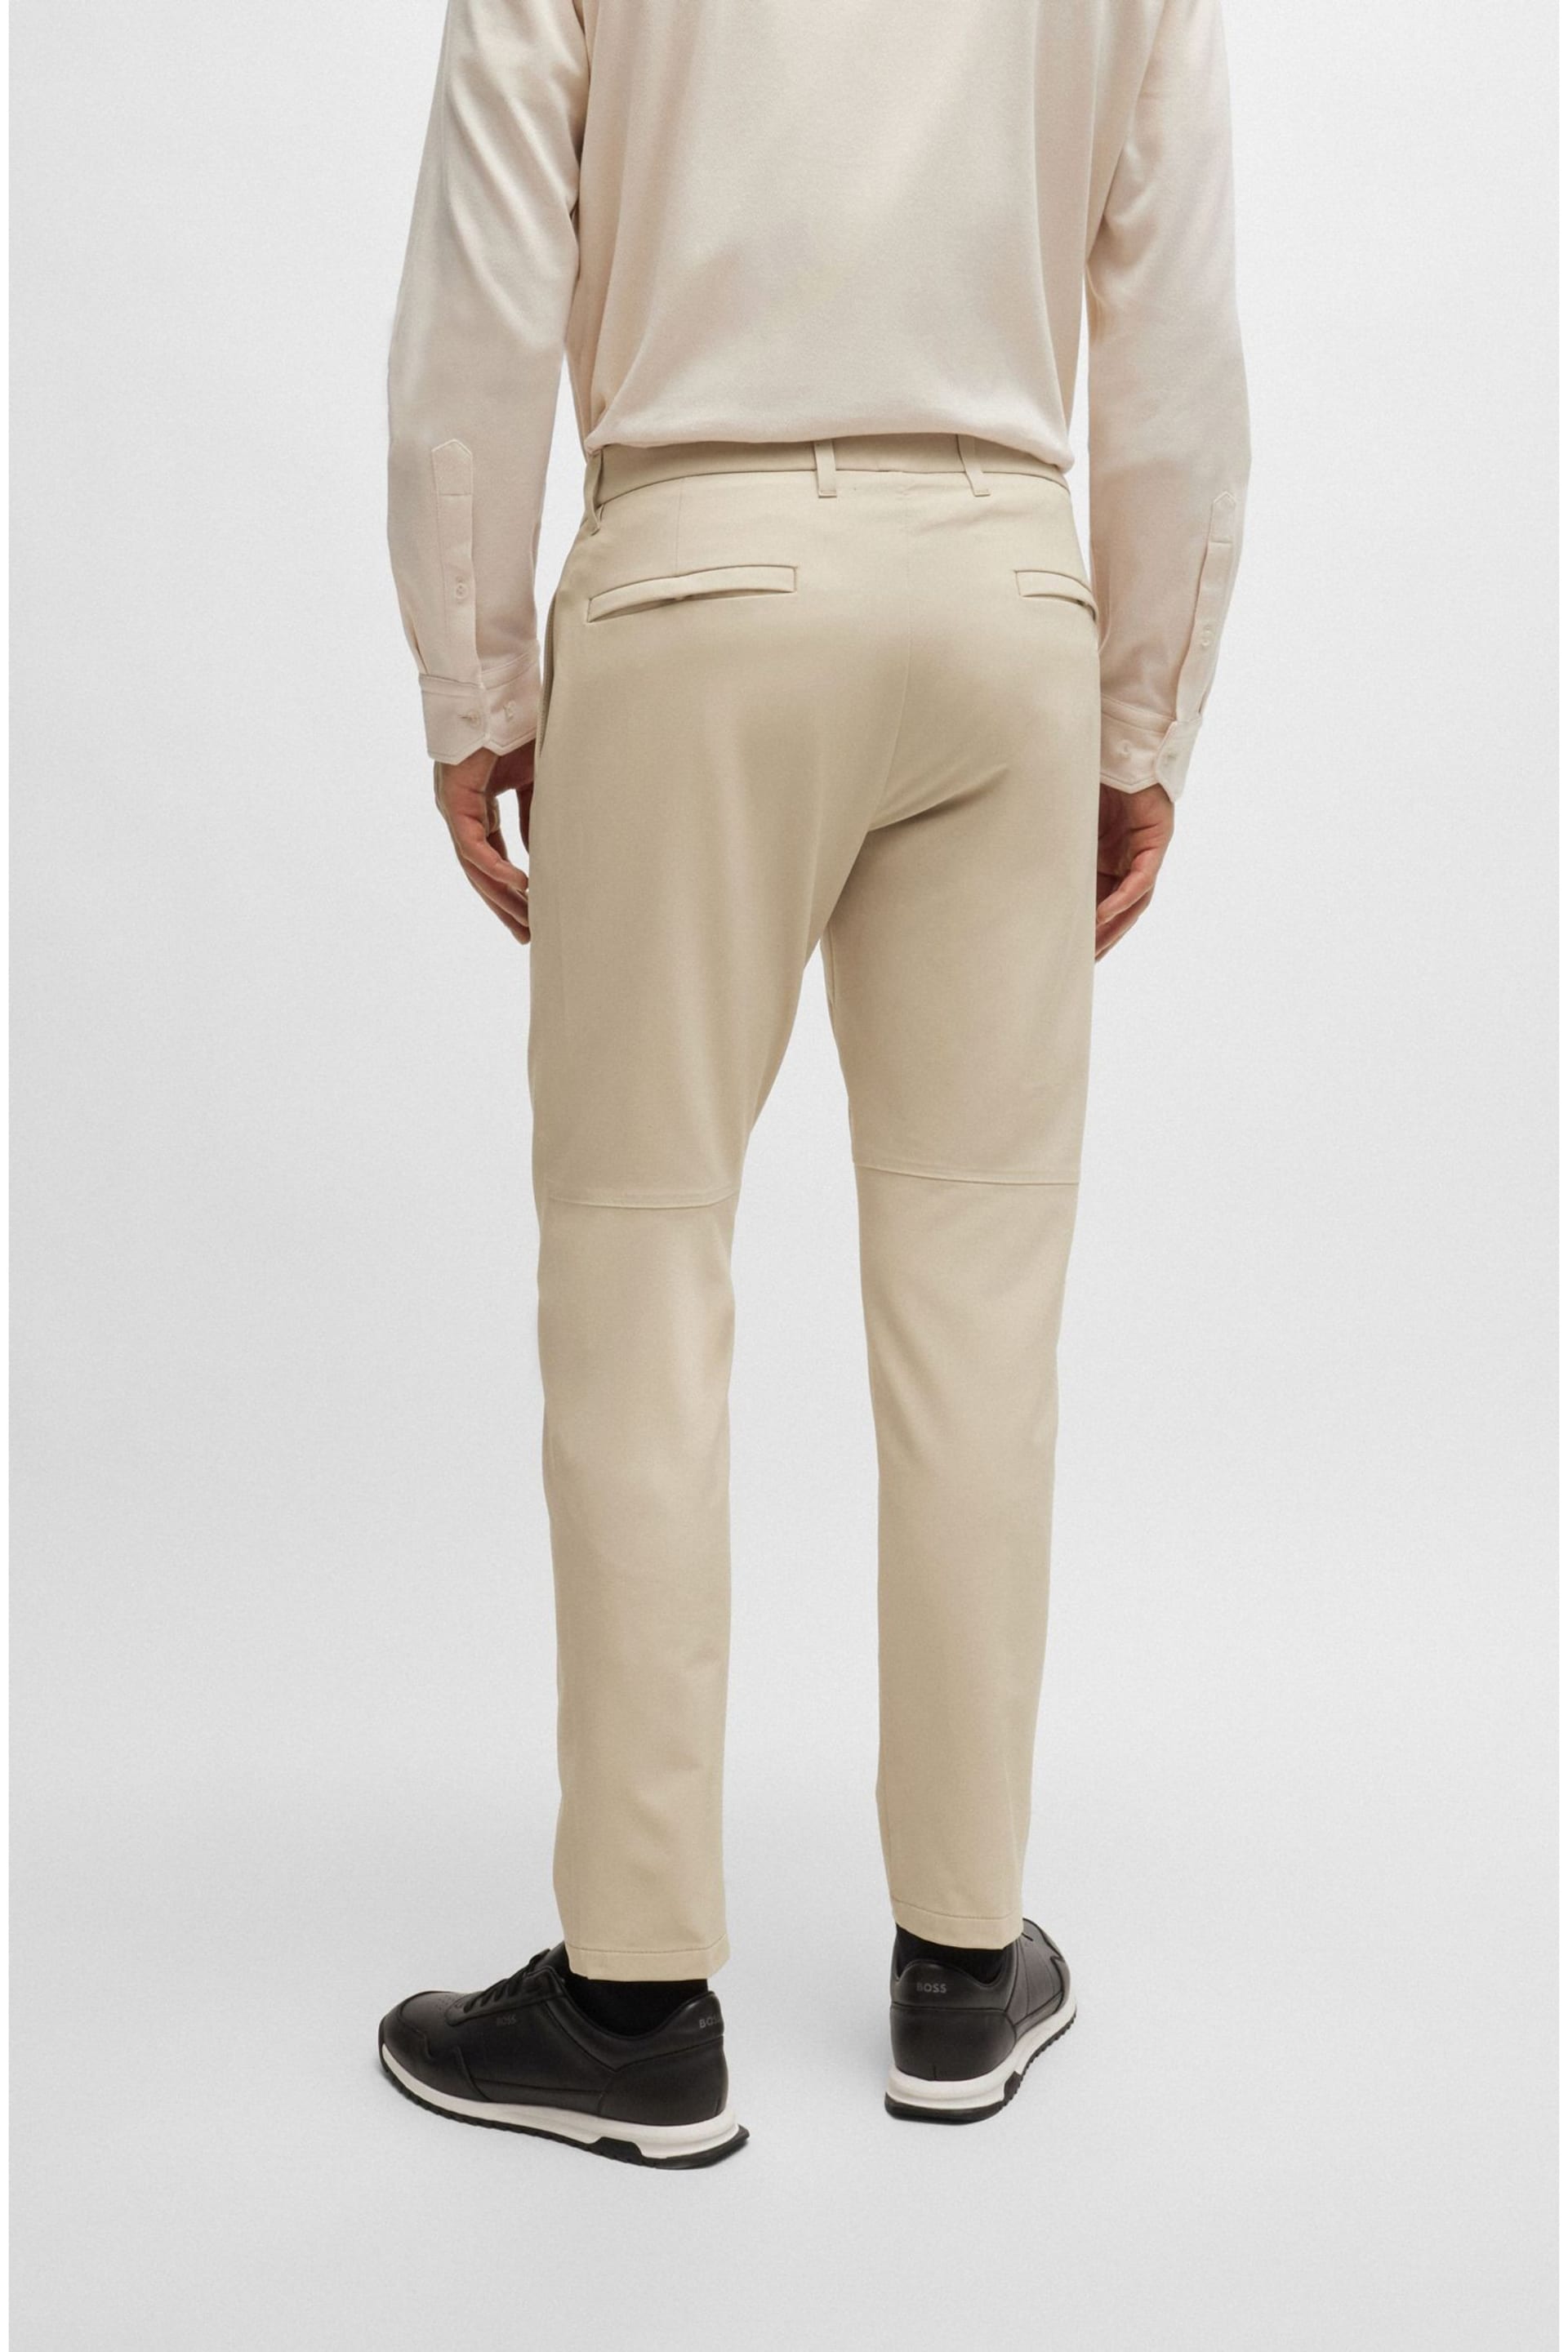 BOSS Cream Slim Fit Stretch Cotton Chino Trousers - Image 3 of 5